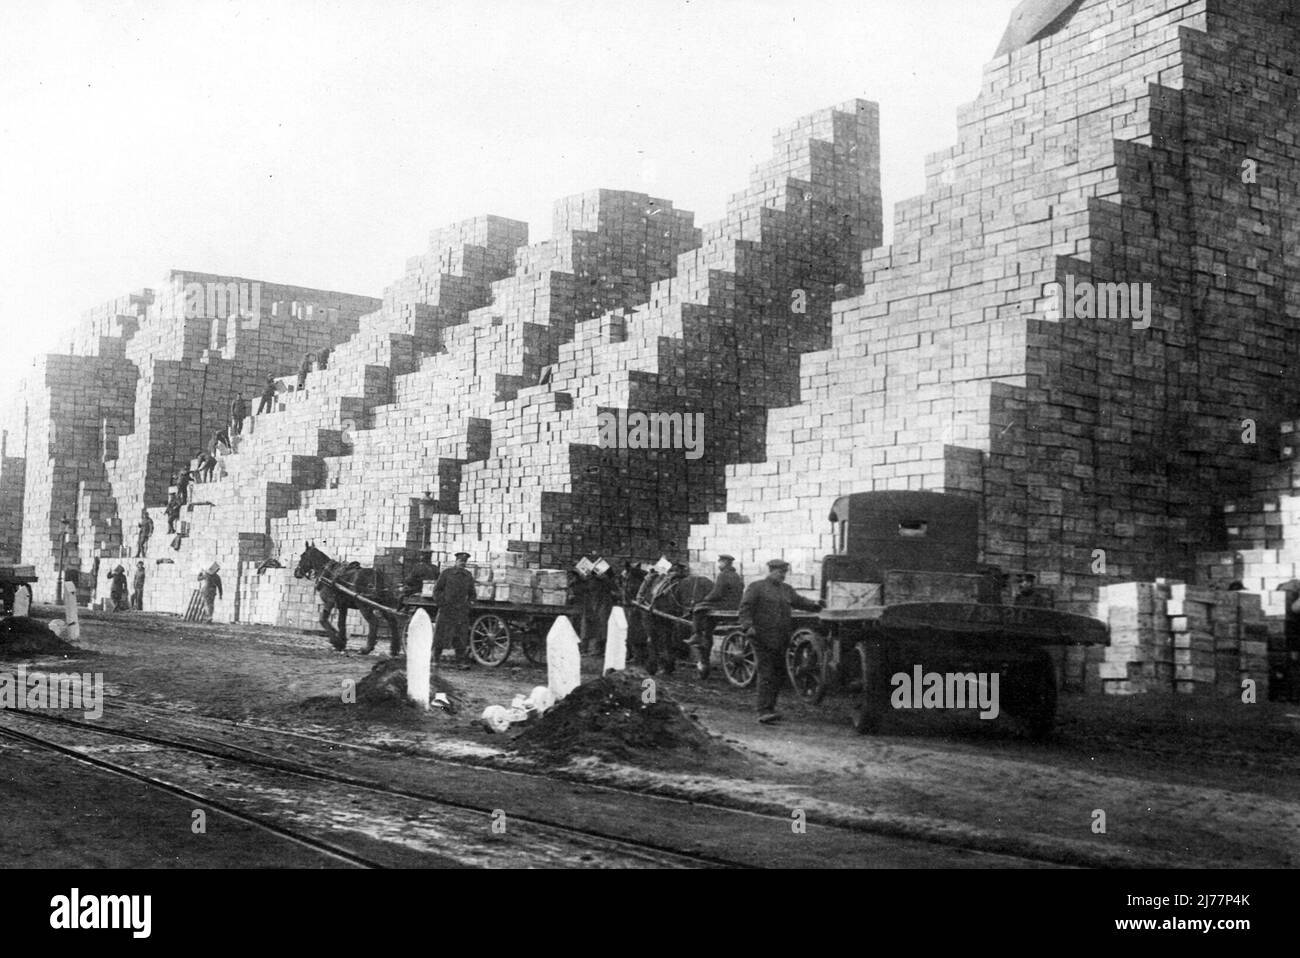 Vast, mountainous stacks of boxed rations at a British Army supply depot in Rouen, 15th January 1917. Stock Photo